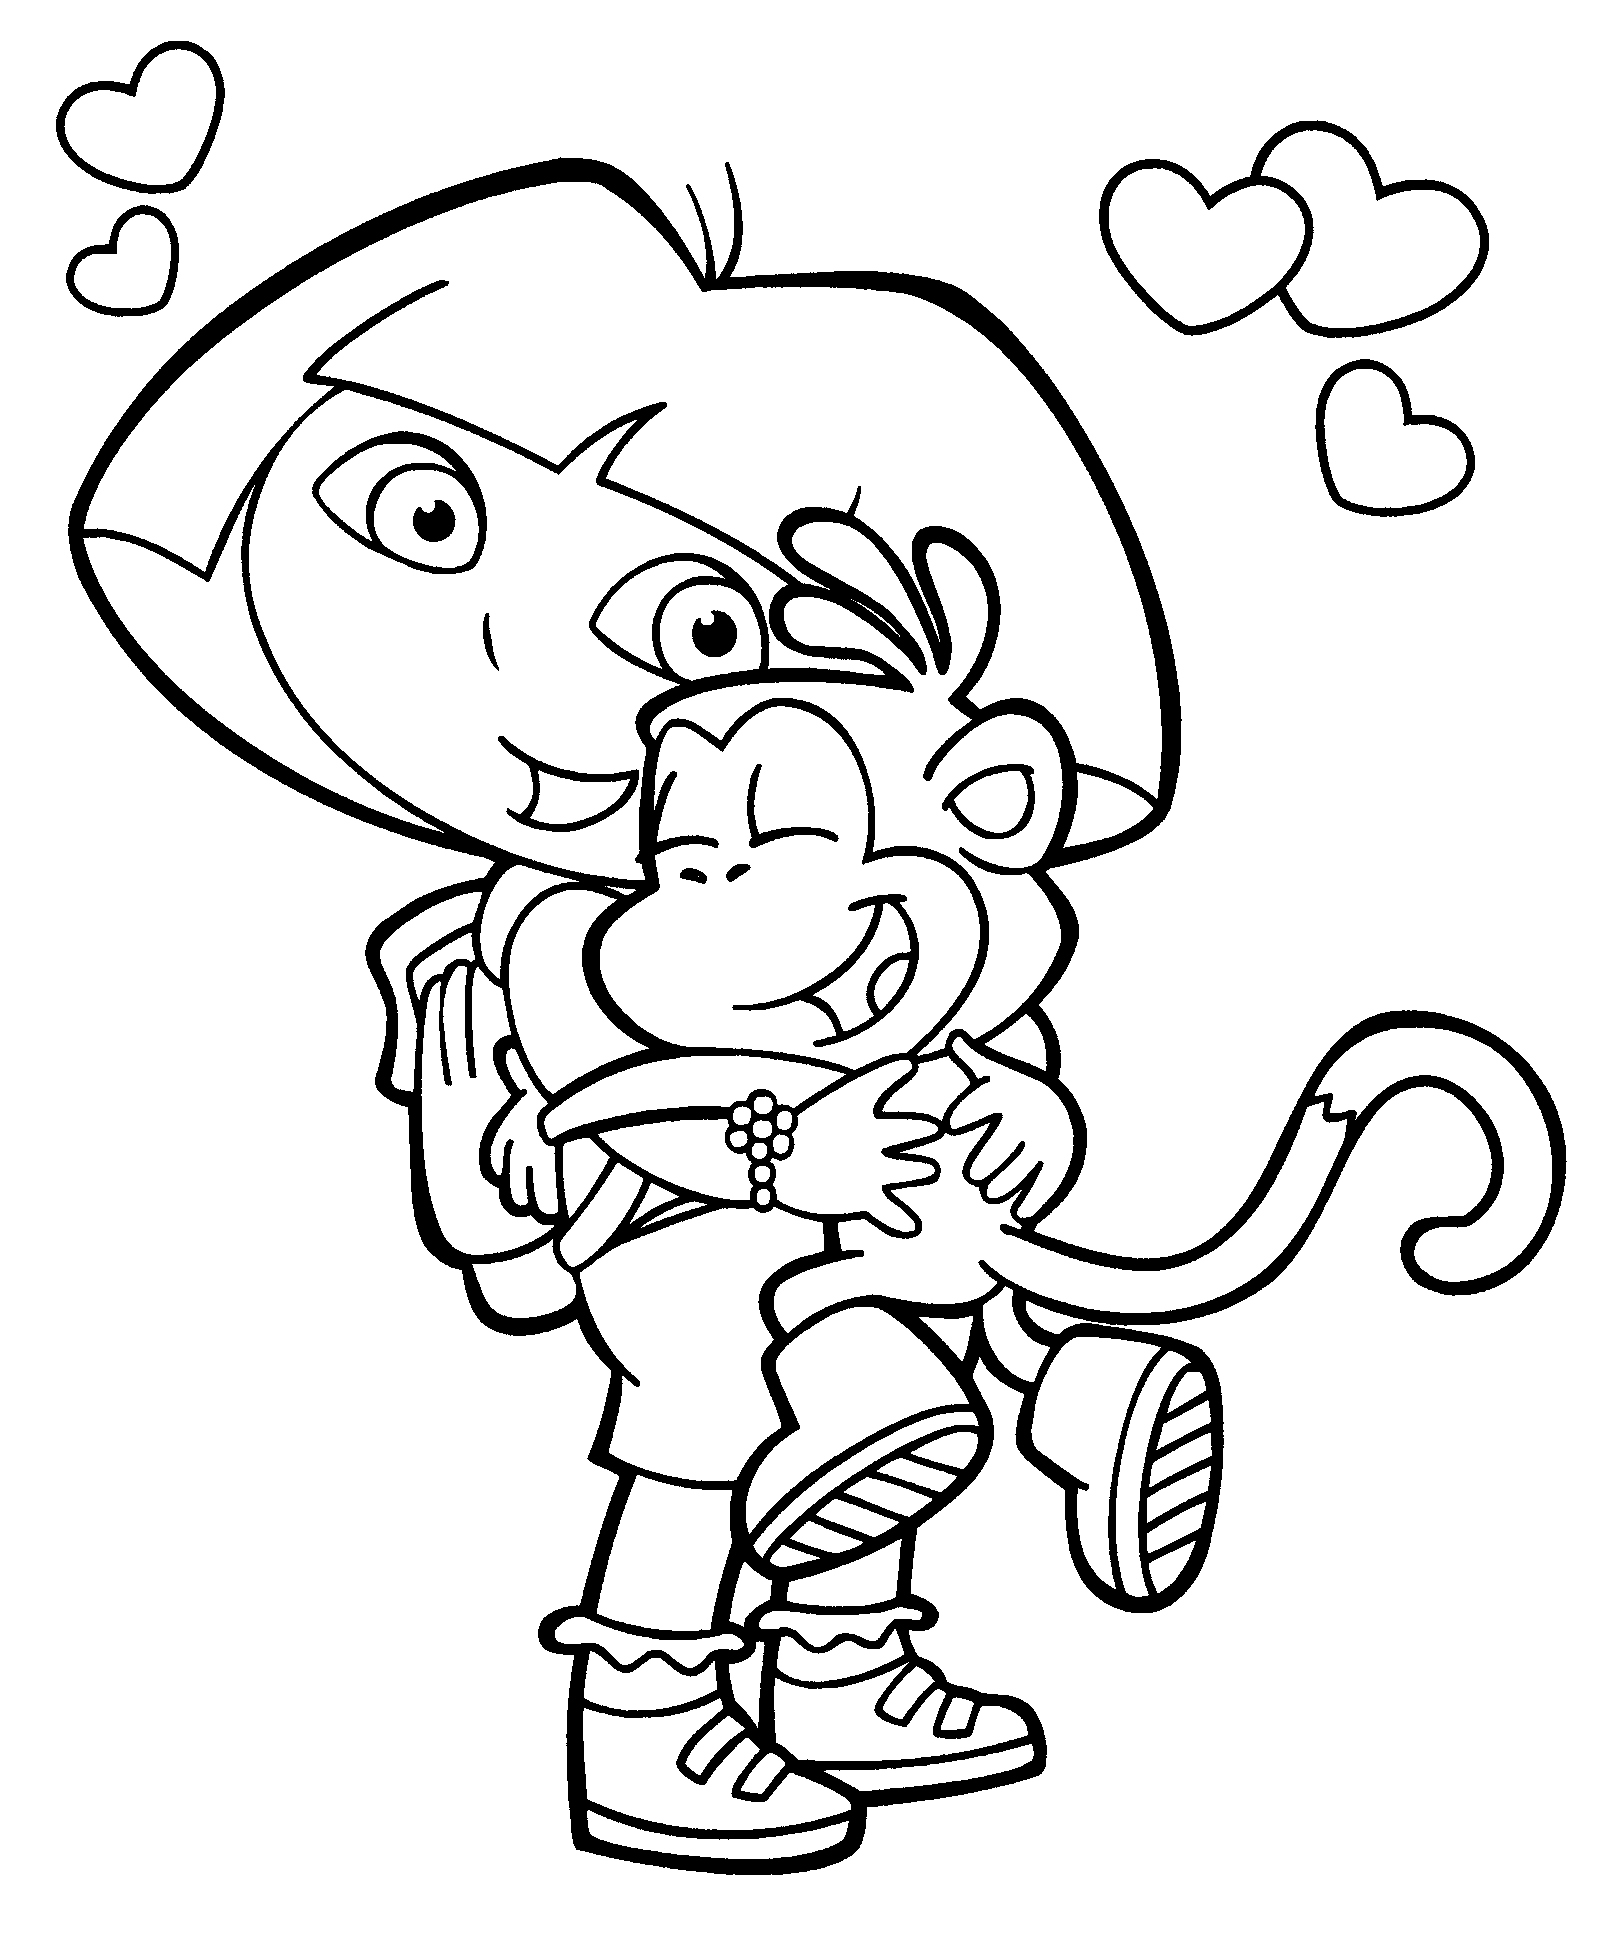 Coloring pages, Coloring and Boots